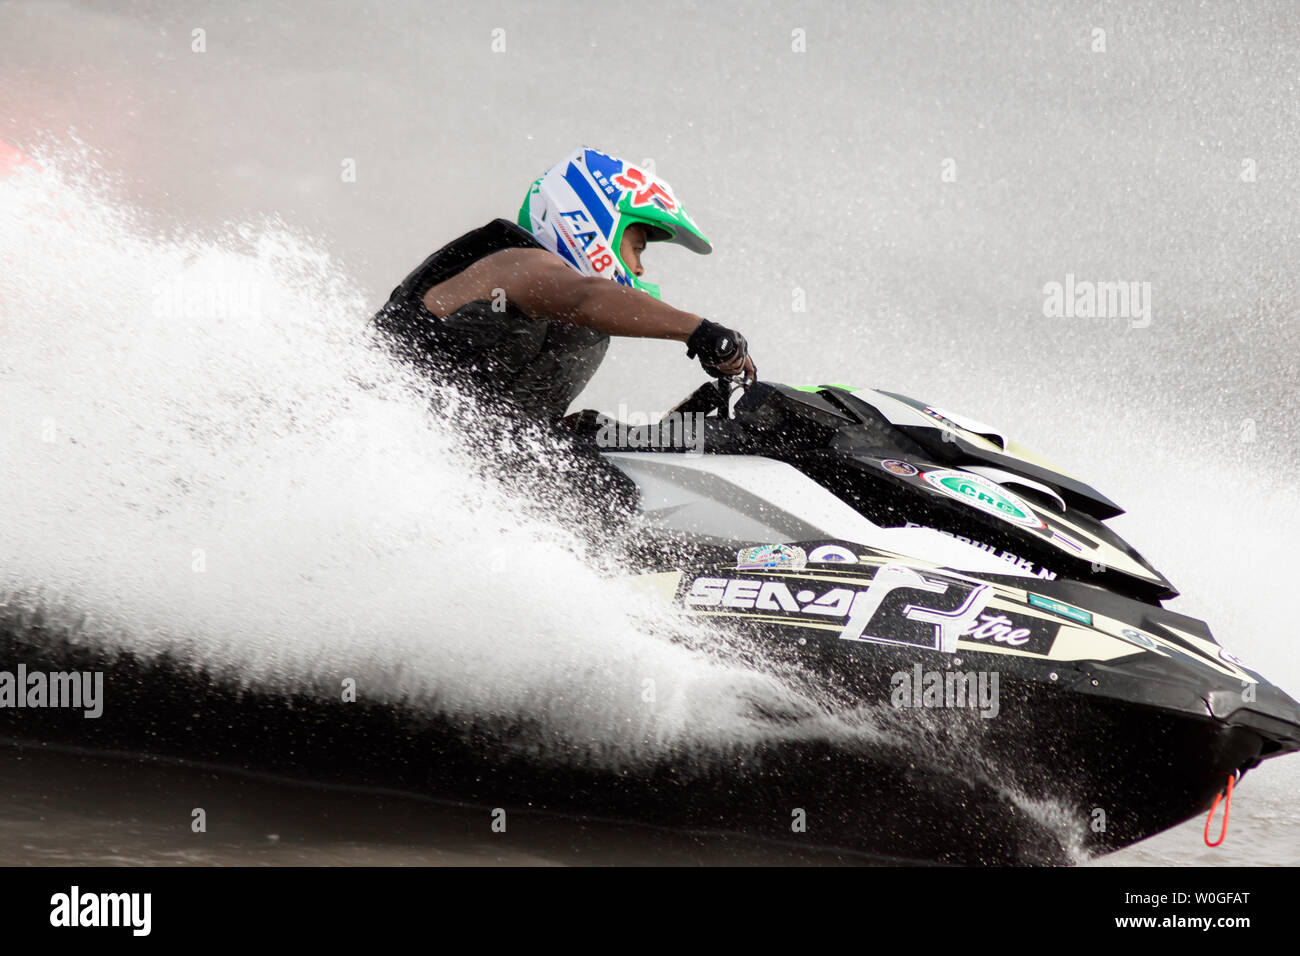 jet ski racer at Jet ski pro tour #3, Udonthani, Thailand - May 25, 2019 :Young man professional jet ski rider performs many tricks on the waves. Stock Photo